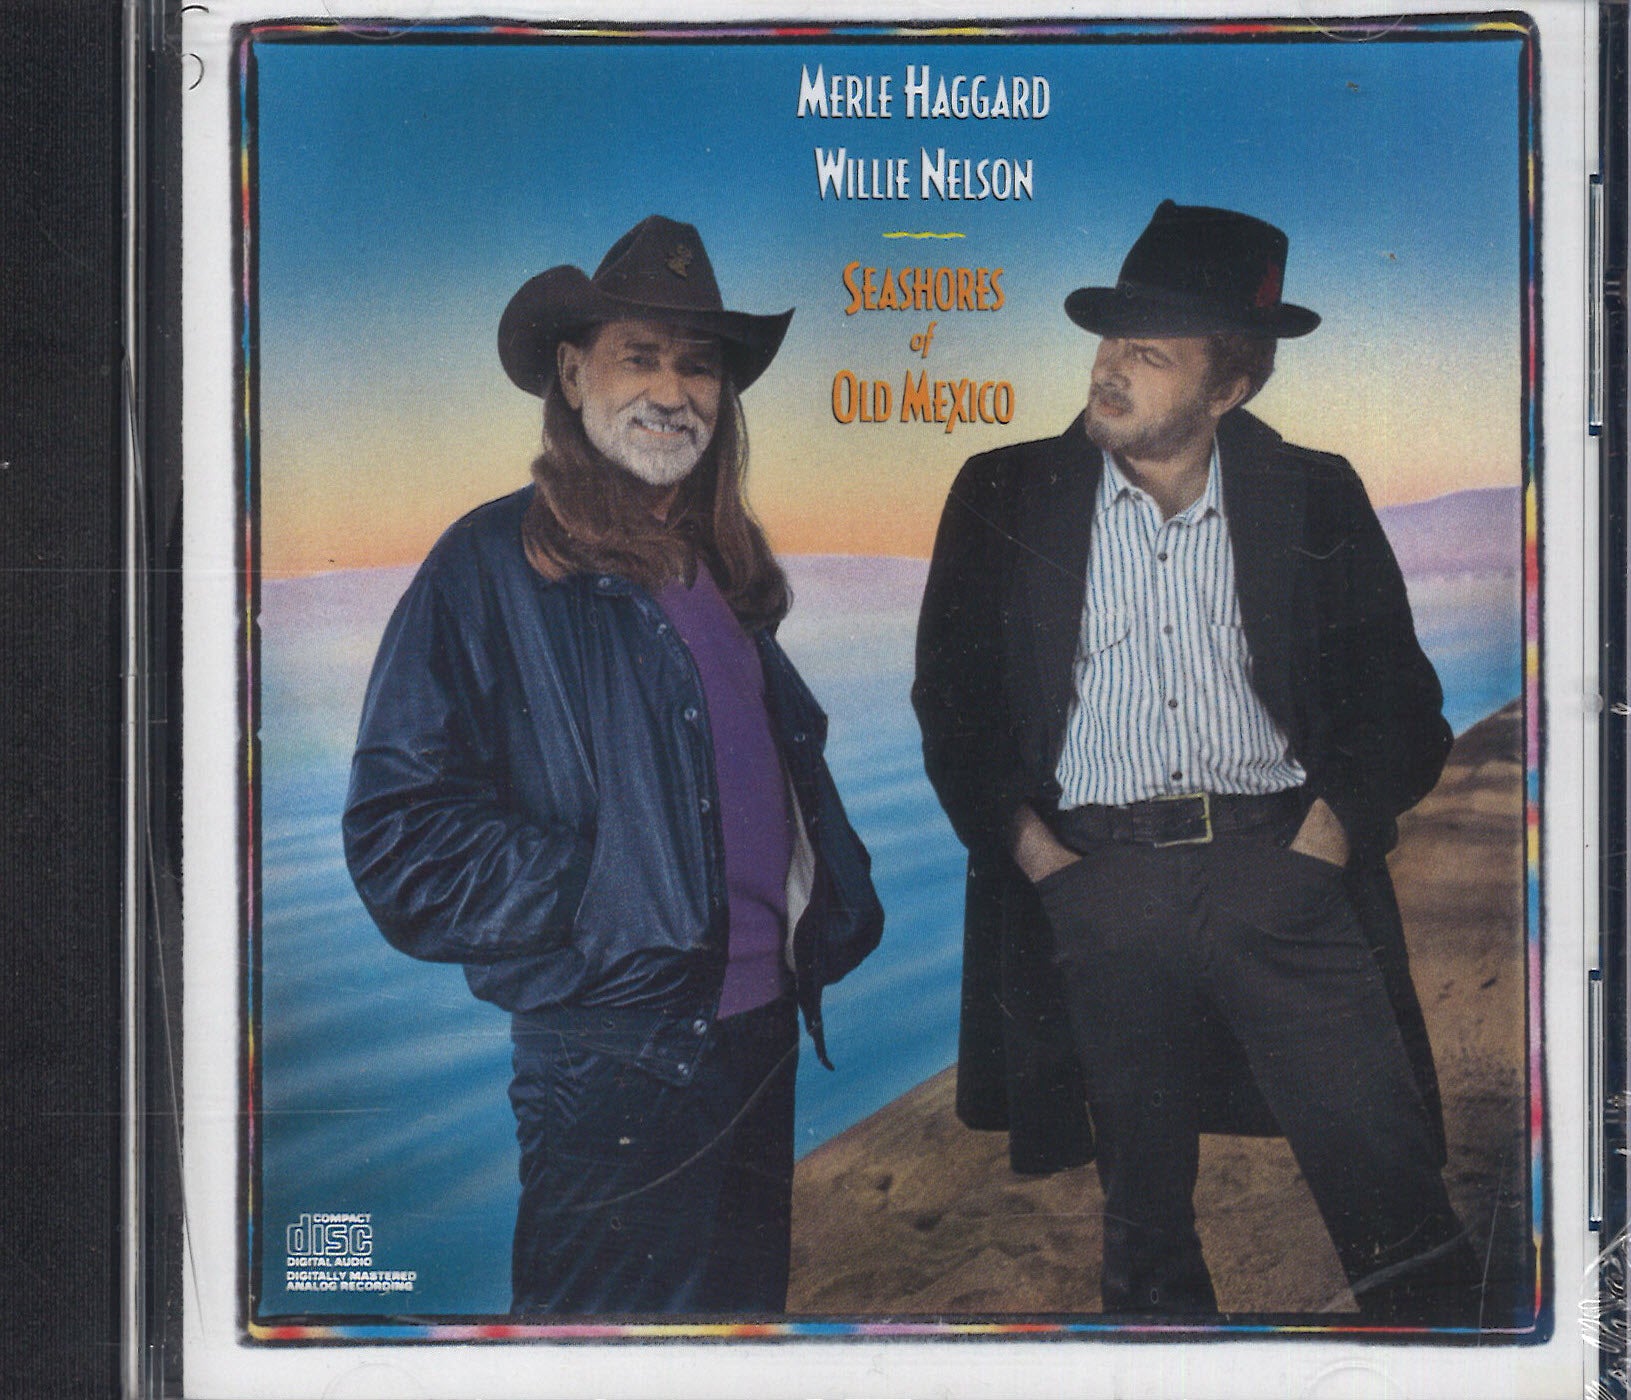 Willie Nelson & Merle Haggard Seashores Of Old Mexico